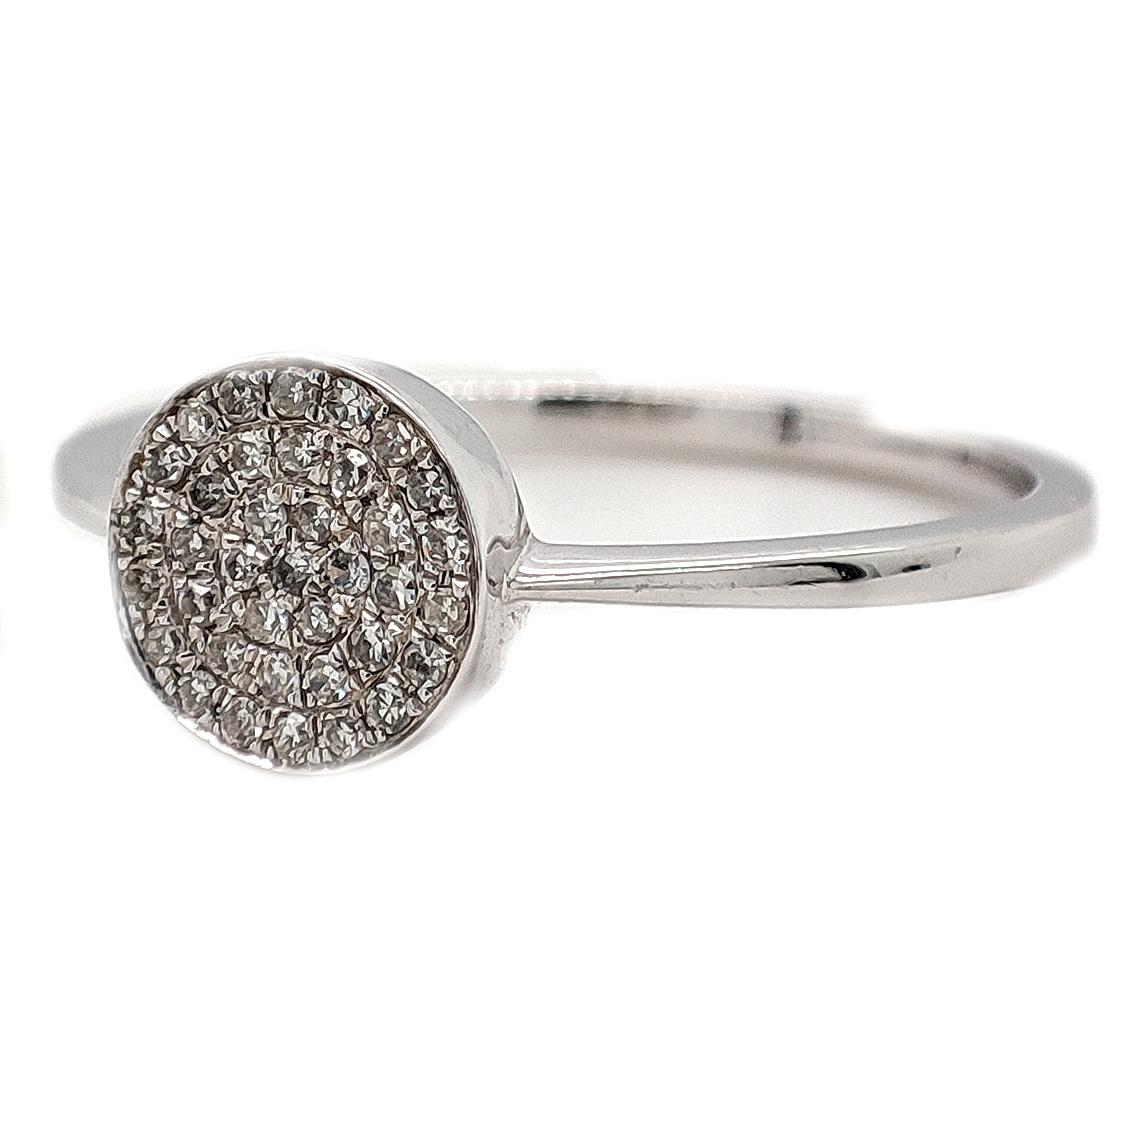 FOR US CUSTOMER NO VAT!

Adorn your hand with the enchanting charm of this 0.25CT Natural Cocktail Diamond Ring. Its distinctive allure is rooted in the petite face adorned with carefully placed diamonds, weighing a total of 1.61 grams, set in the